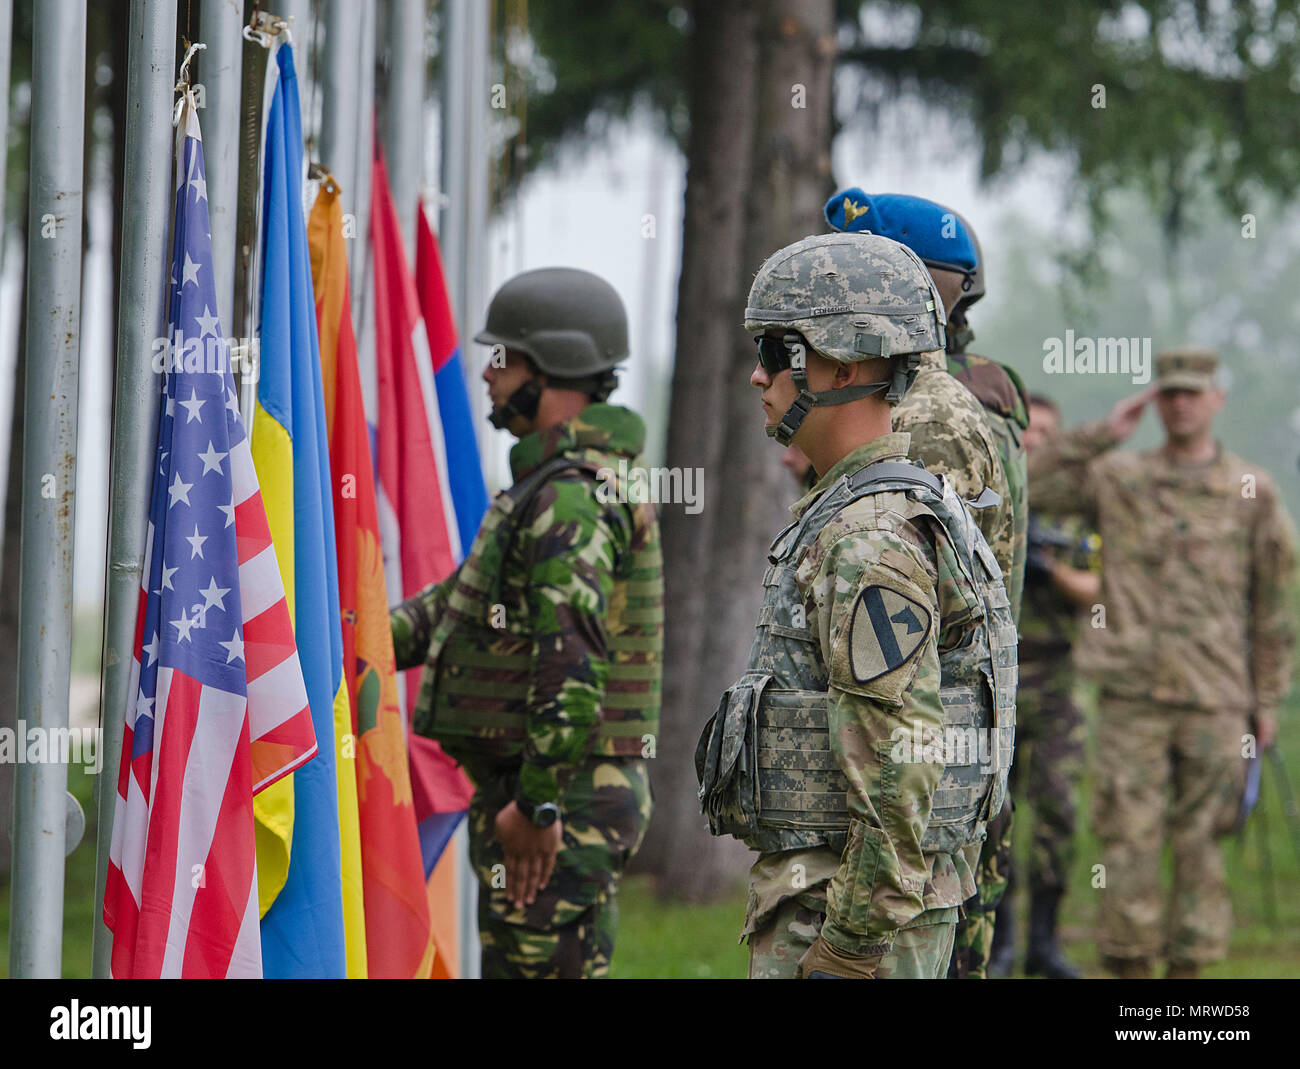 Soldiers from Armenia, Croatia, Montenegro, Romania, Ukraine and the United States wait to raise their nation’s flag during the official opening ceremony for the multinational training exercise Getica Saber 17 at Joint National Training Center in Cincu, Romania, July 7, 2017. Getica Saber 17 is a U.S-led fire support coordination exercise and combined arms live-fire exercise that incorporates six Allied and partner nations with more than 4,000 Soldiers. Getica Saber runs concurrent with Saber Guardian, a U.S. Army Europe-led, multinational exercise that spans across Bulgaria, Hungary and Roman Stock Photo